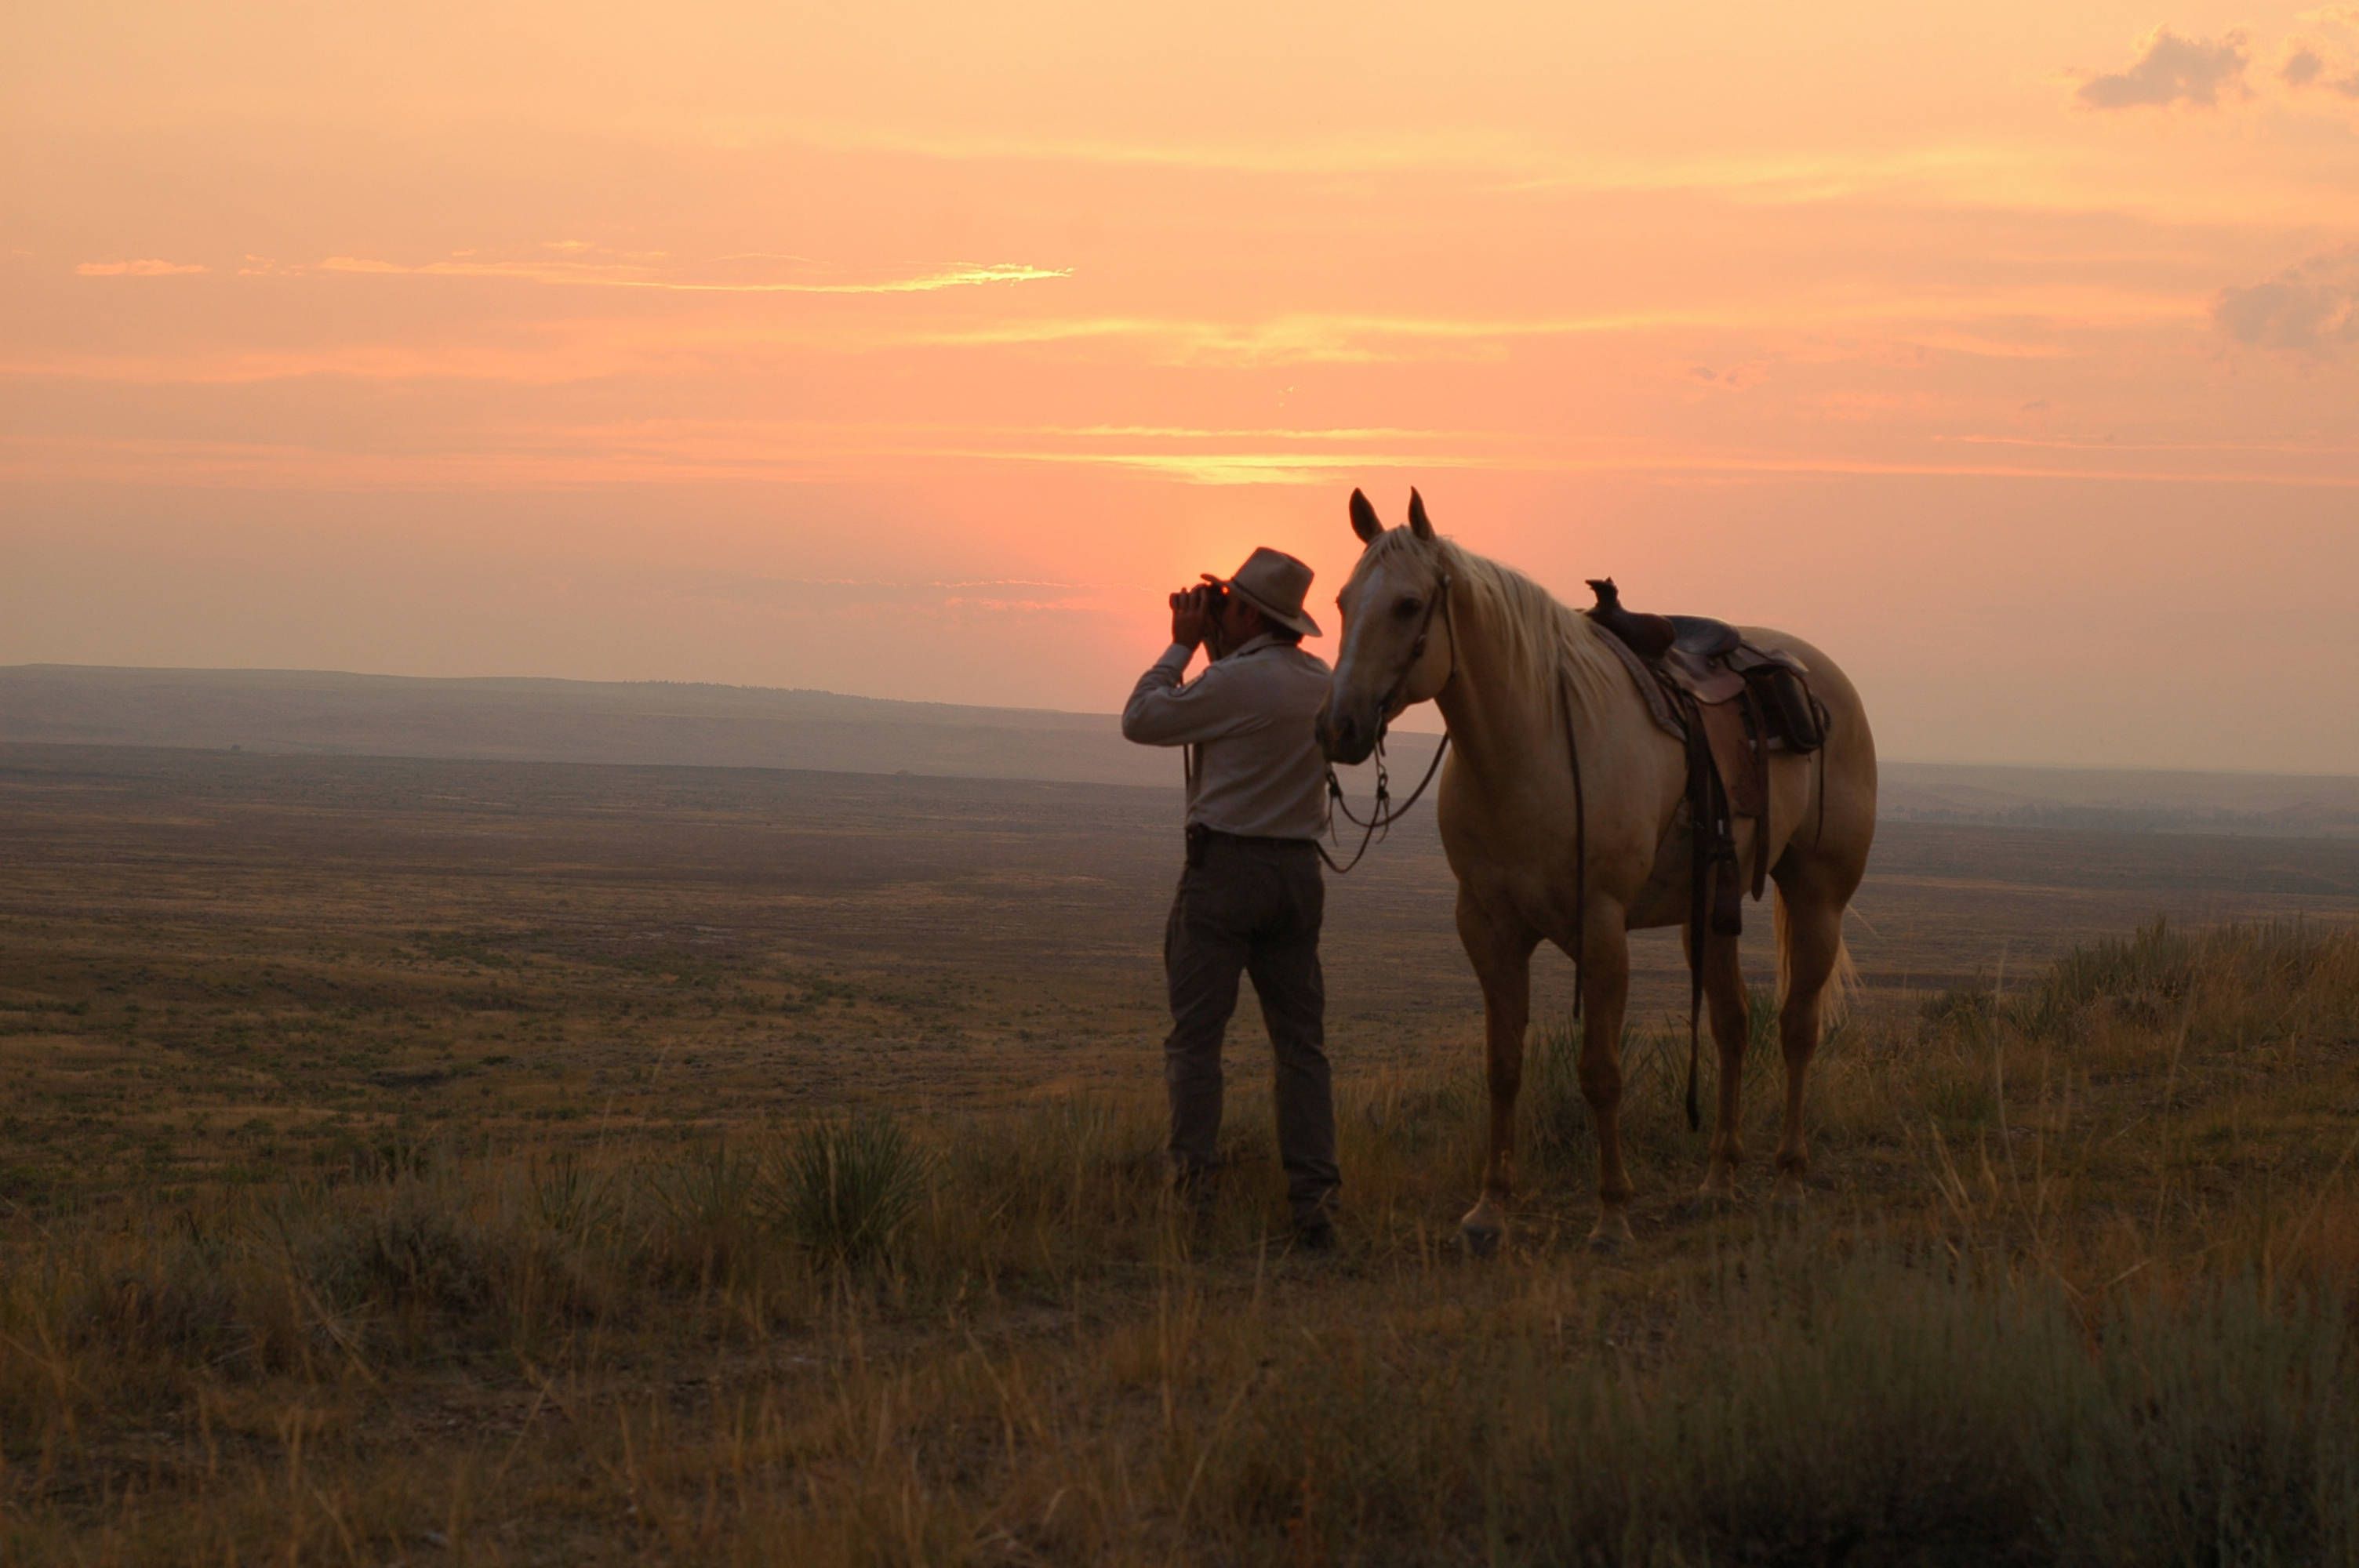 A man standing next to a horse looking over a desert plain at sunset